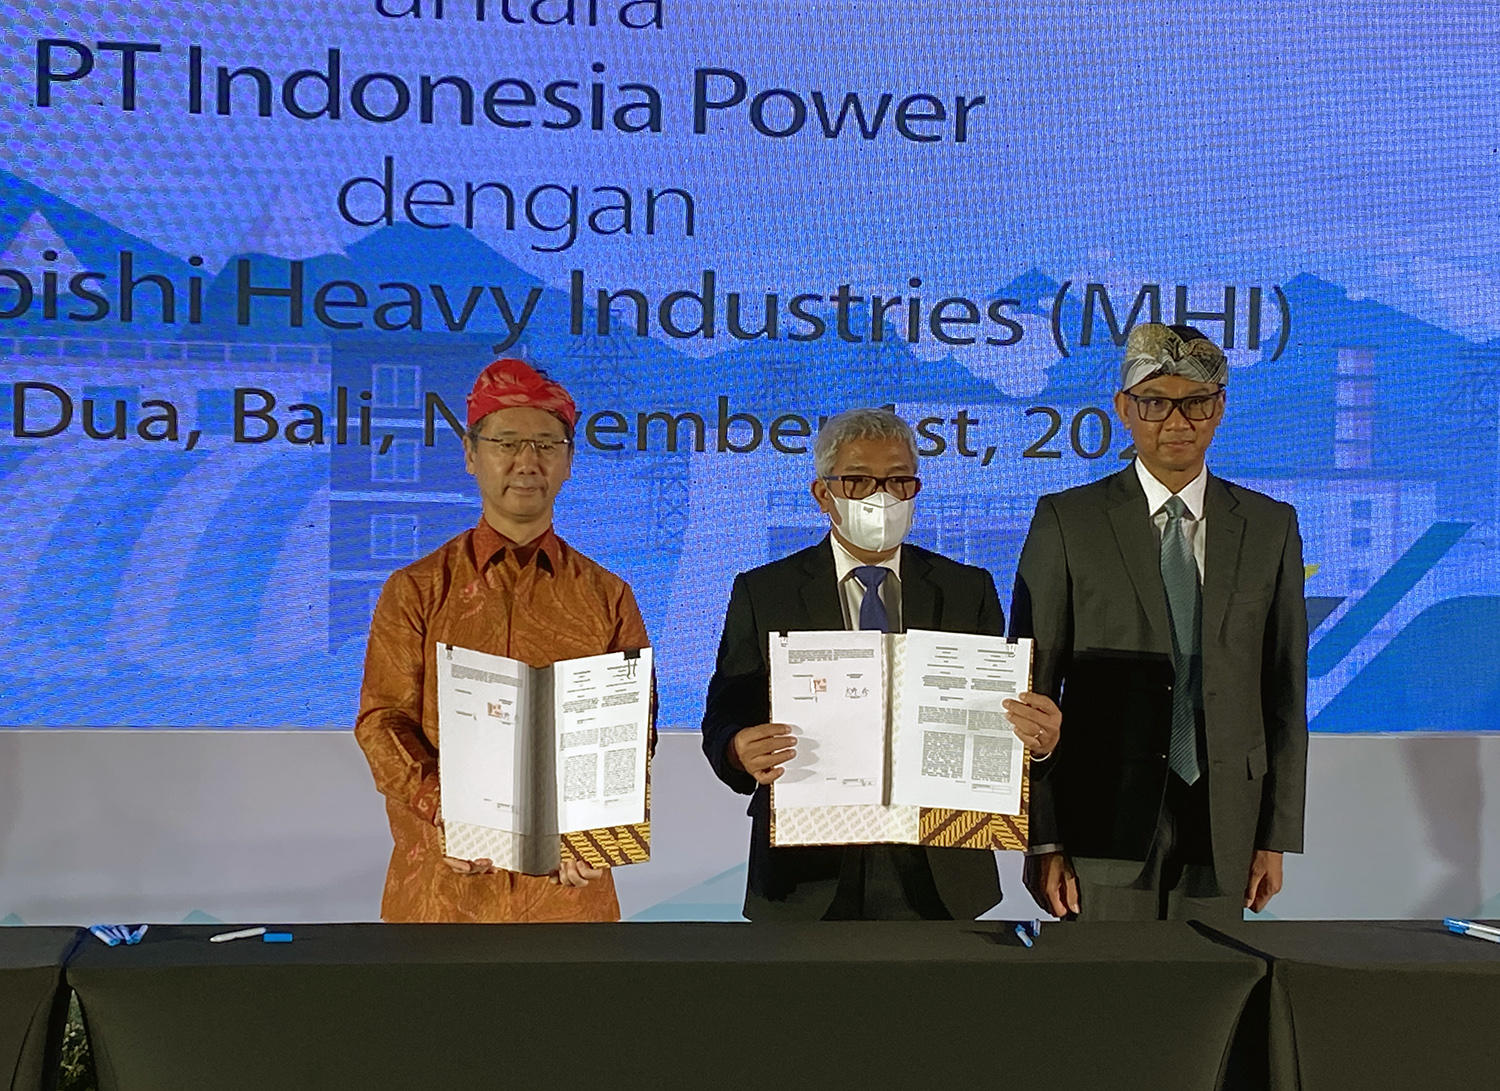 [Pictured from left to right] Osamu Ono (Chief Regional Officer, Asia Pacific & India/MHI), Rachmad Handoko (Director/Indonesia Power) and Darmawan Prasodjo (President Director/PLN) at signing ceremony